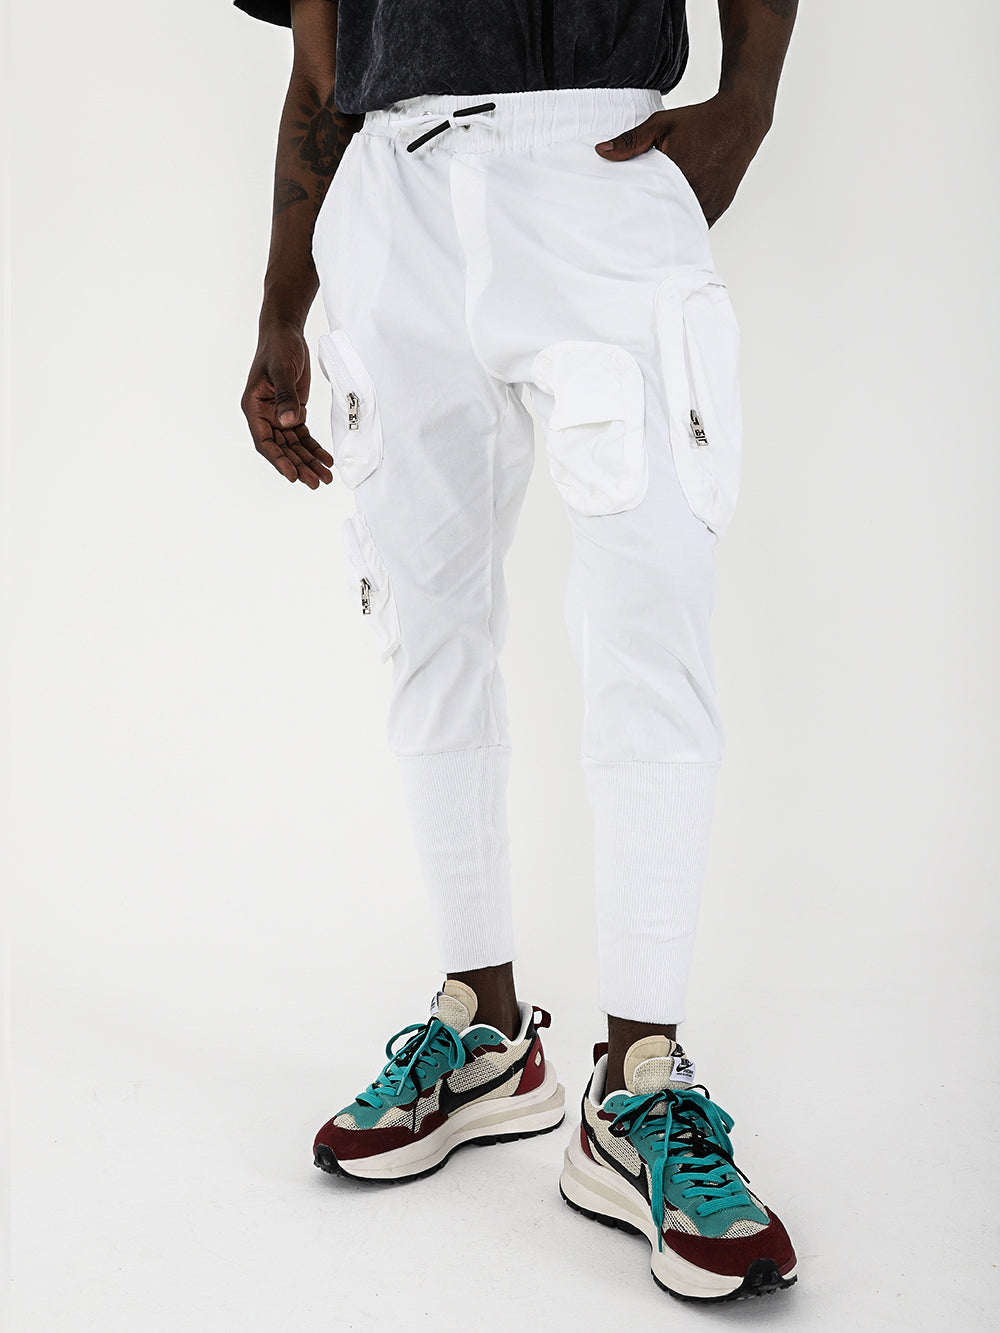 A man in comfortable white STERLING JOGGERS with adjustable drawstring waist.